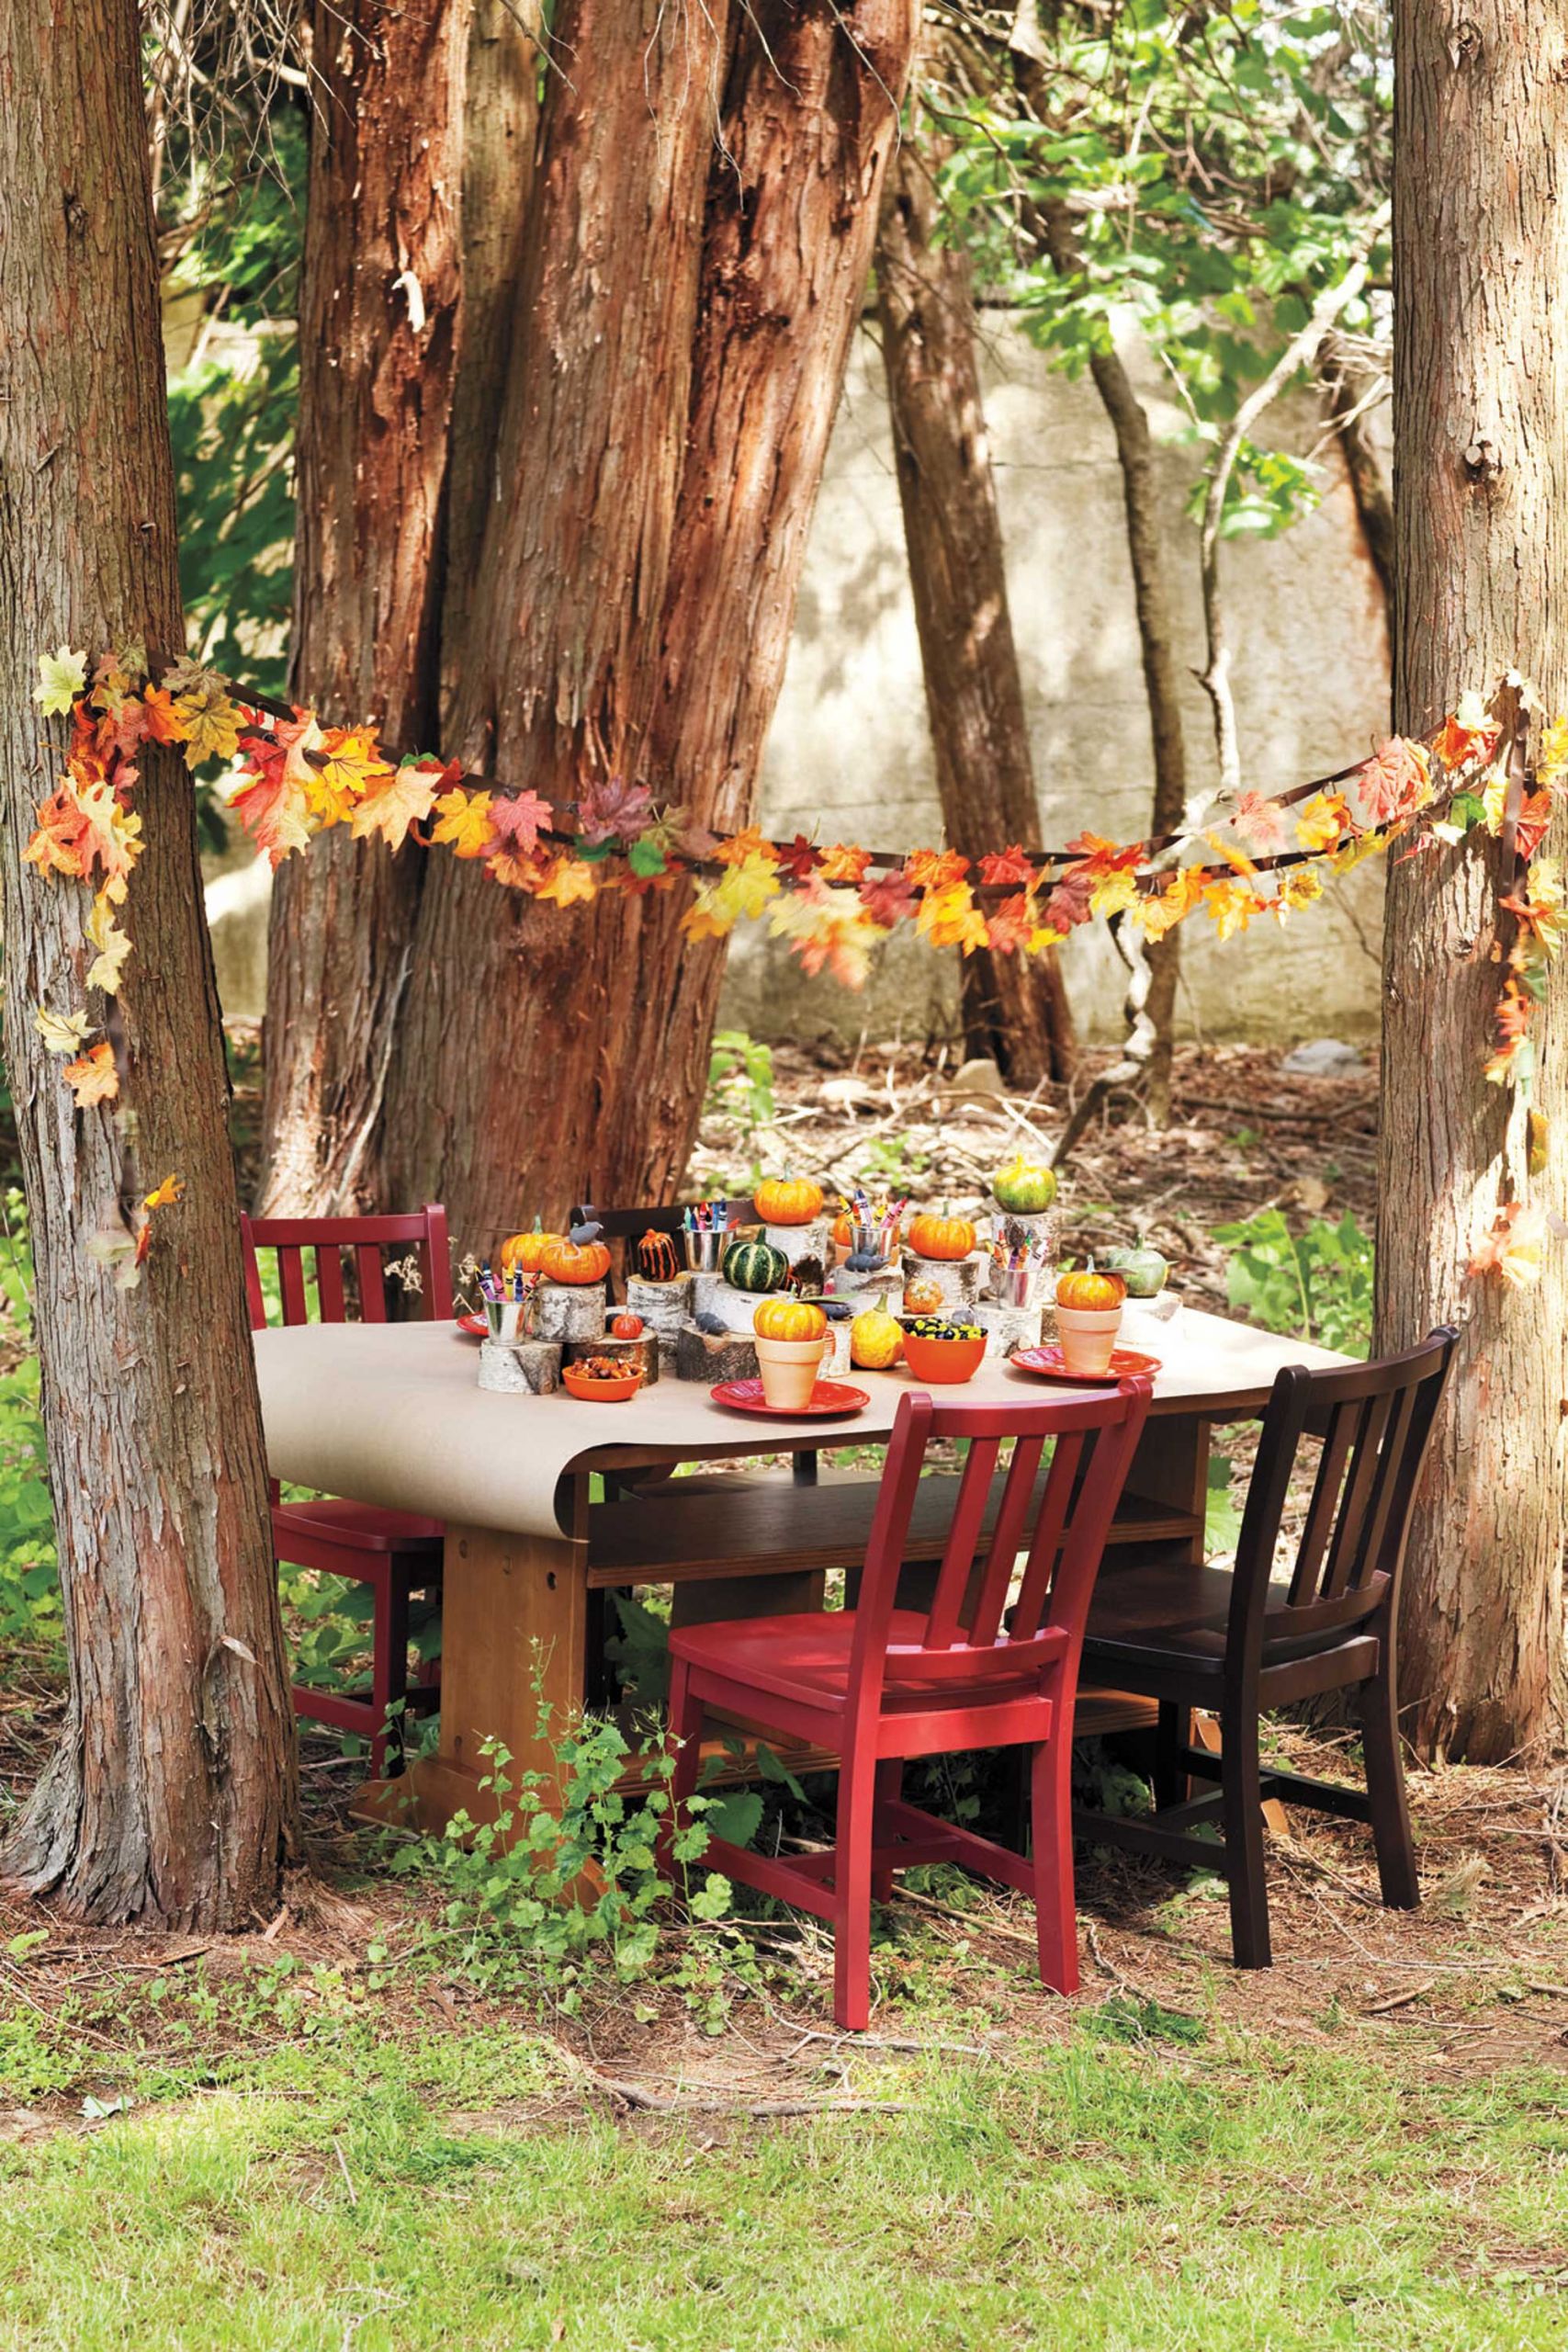 Fall Party Ideas For Kids
 11 Fall Harvest Party Ideas for Kids Autumn Party